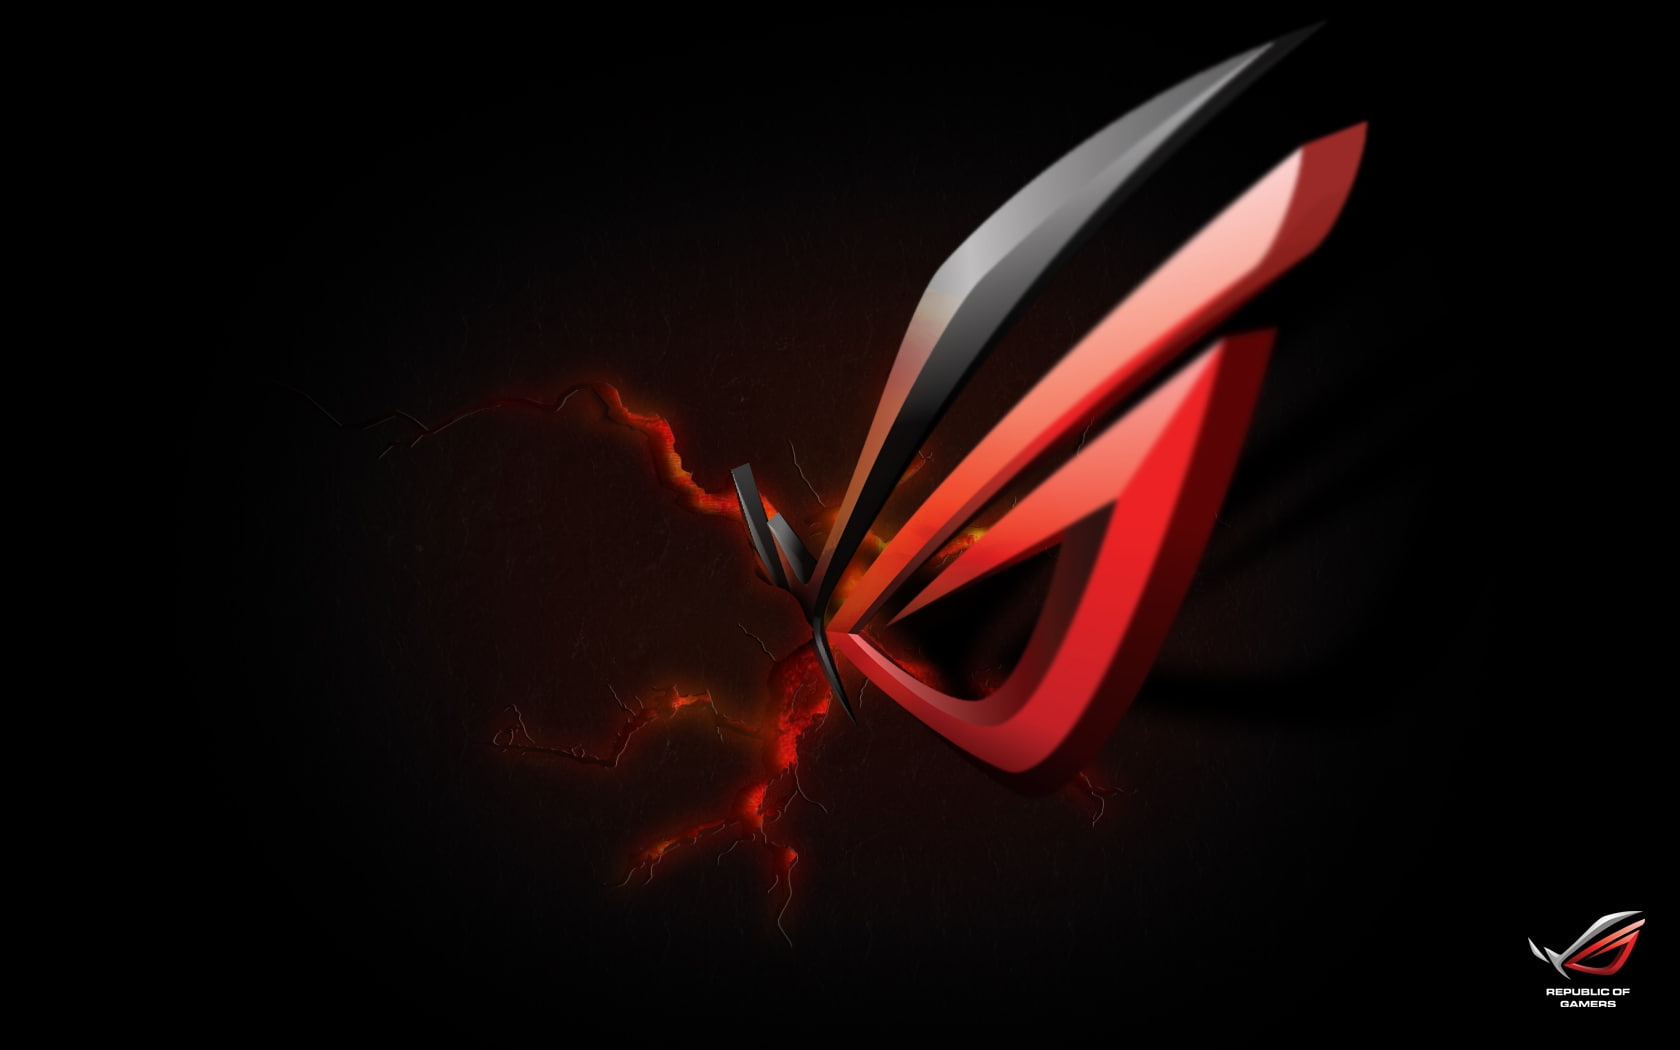 AMD ASUS ASUS ROG Technology Other HD Art, ATI